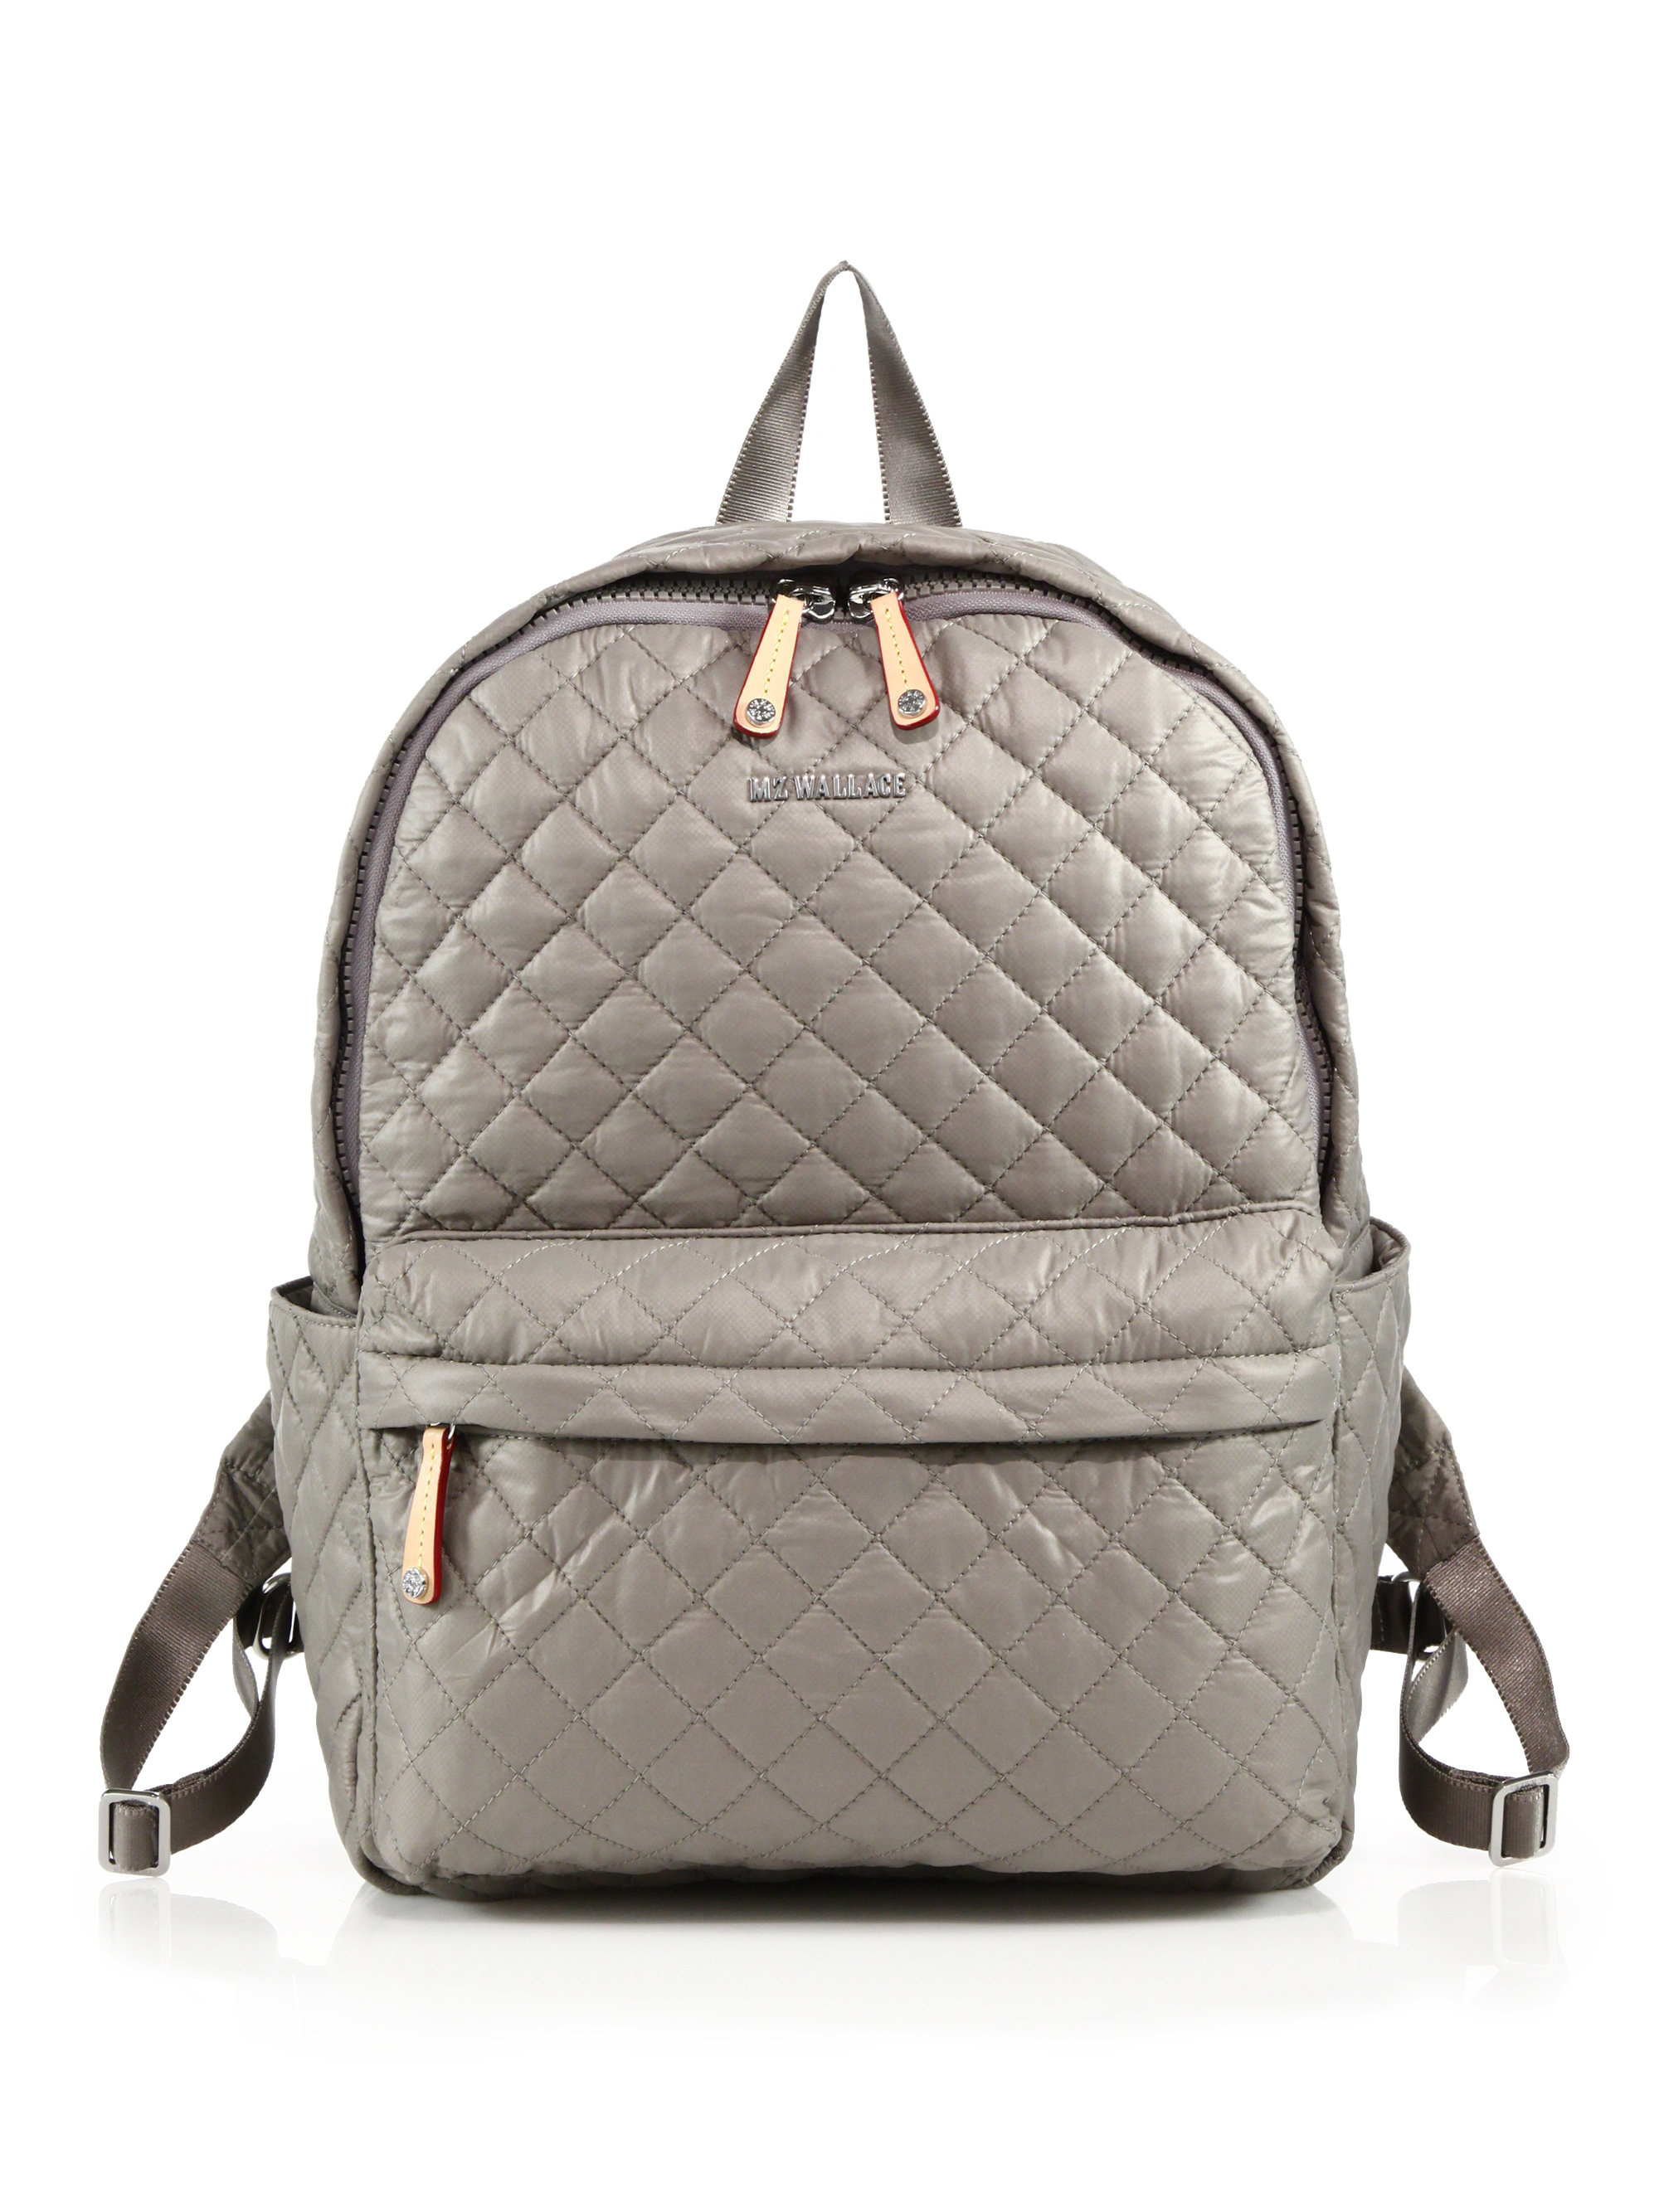 MZ Wallace REC METRO CITY GRAY QUILTED SOFT NYLON